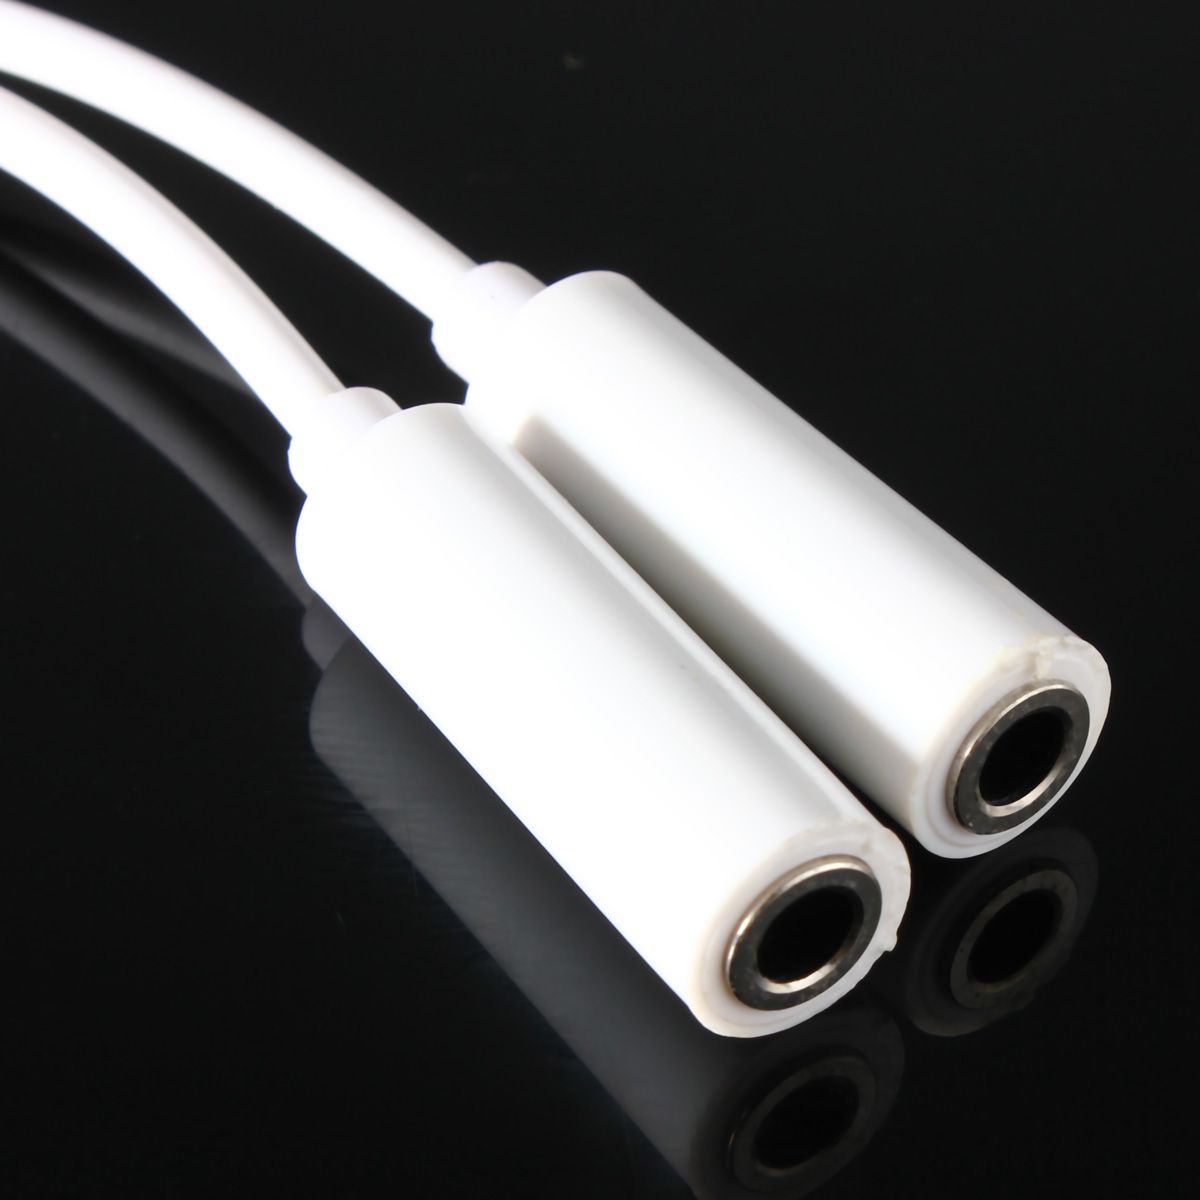 35-mm-Stereo-Plug-Y-Splitter-1-Male-to-2-Female-Audio-Cable-for-Earphone-Headset-Headphone-MP3-MP4-C-1546741